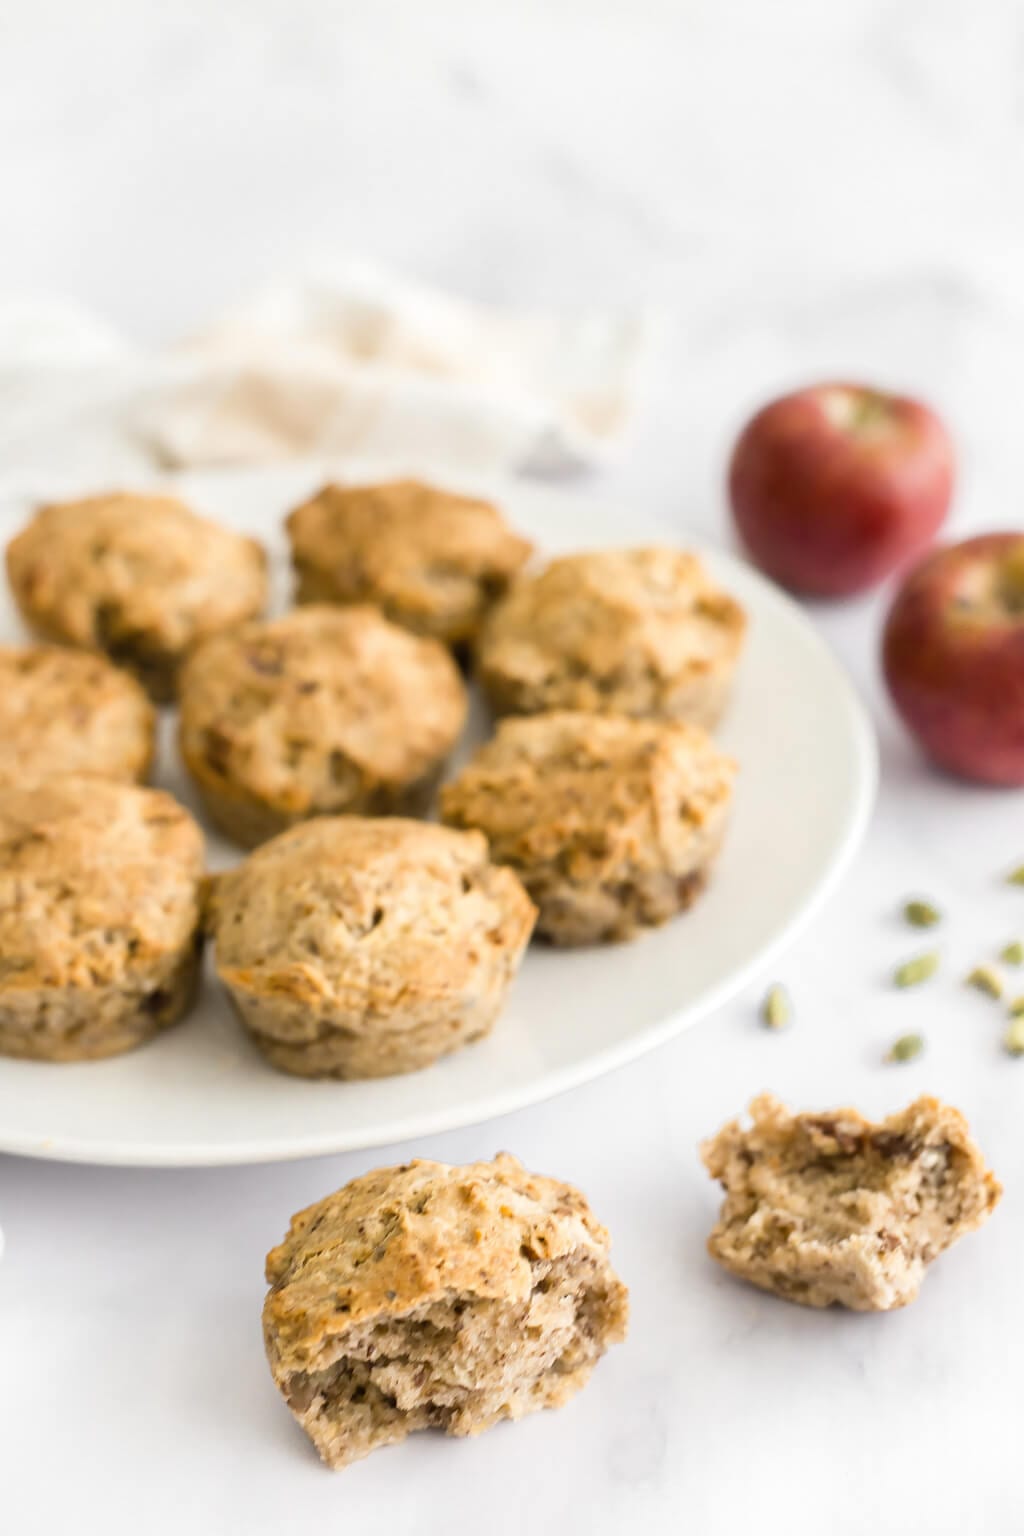 These gluten free muffins are perfect for breakfast on the run, or an afternoon snack when you want something to fill you up between meals.